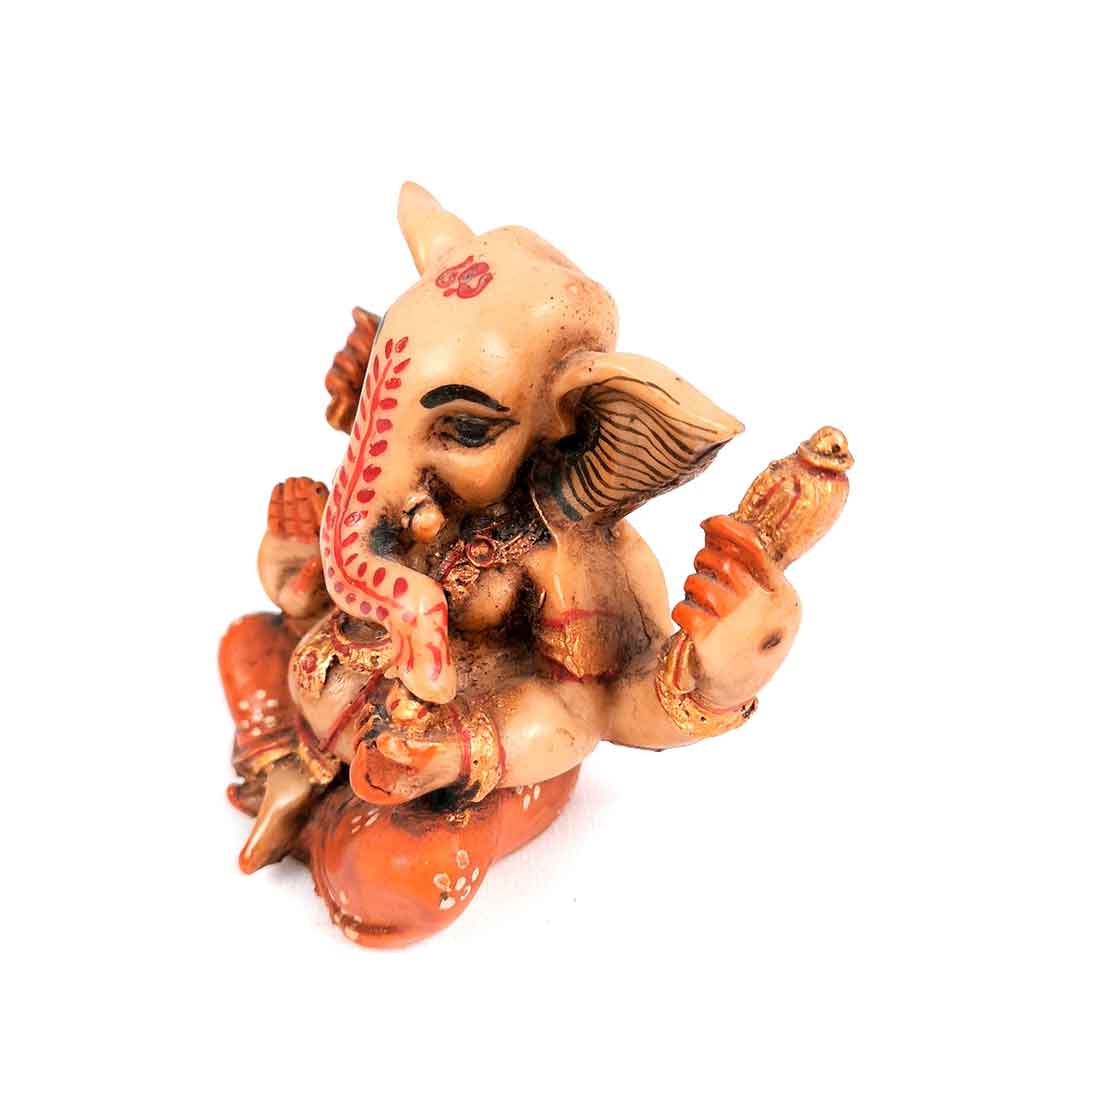 Ganesh Statue | Ganesha Idol Murti - for Puja, Home, Office Desk, Table, Living Room, Car Dashboard Decor & Gifts - 4 Inch